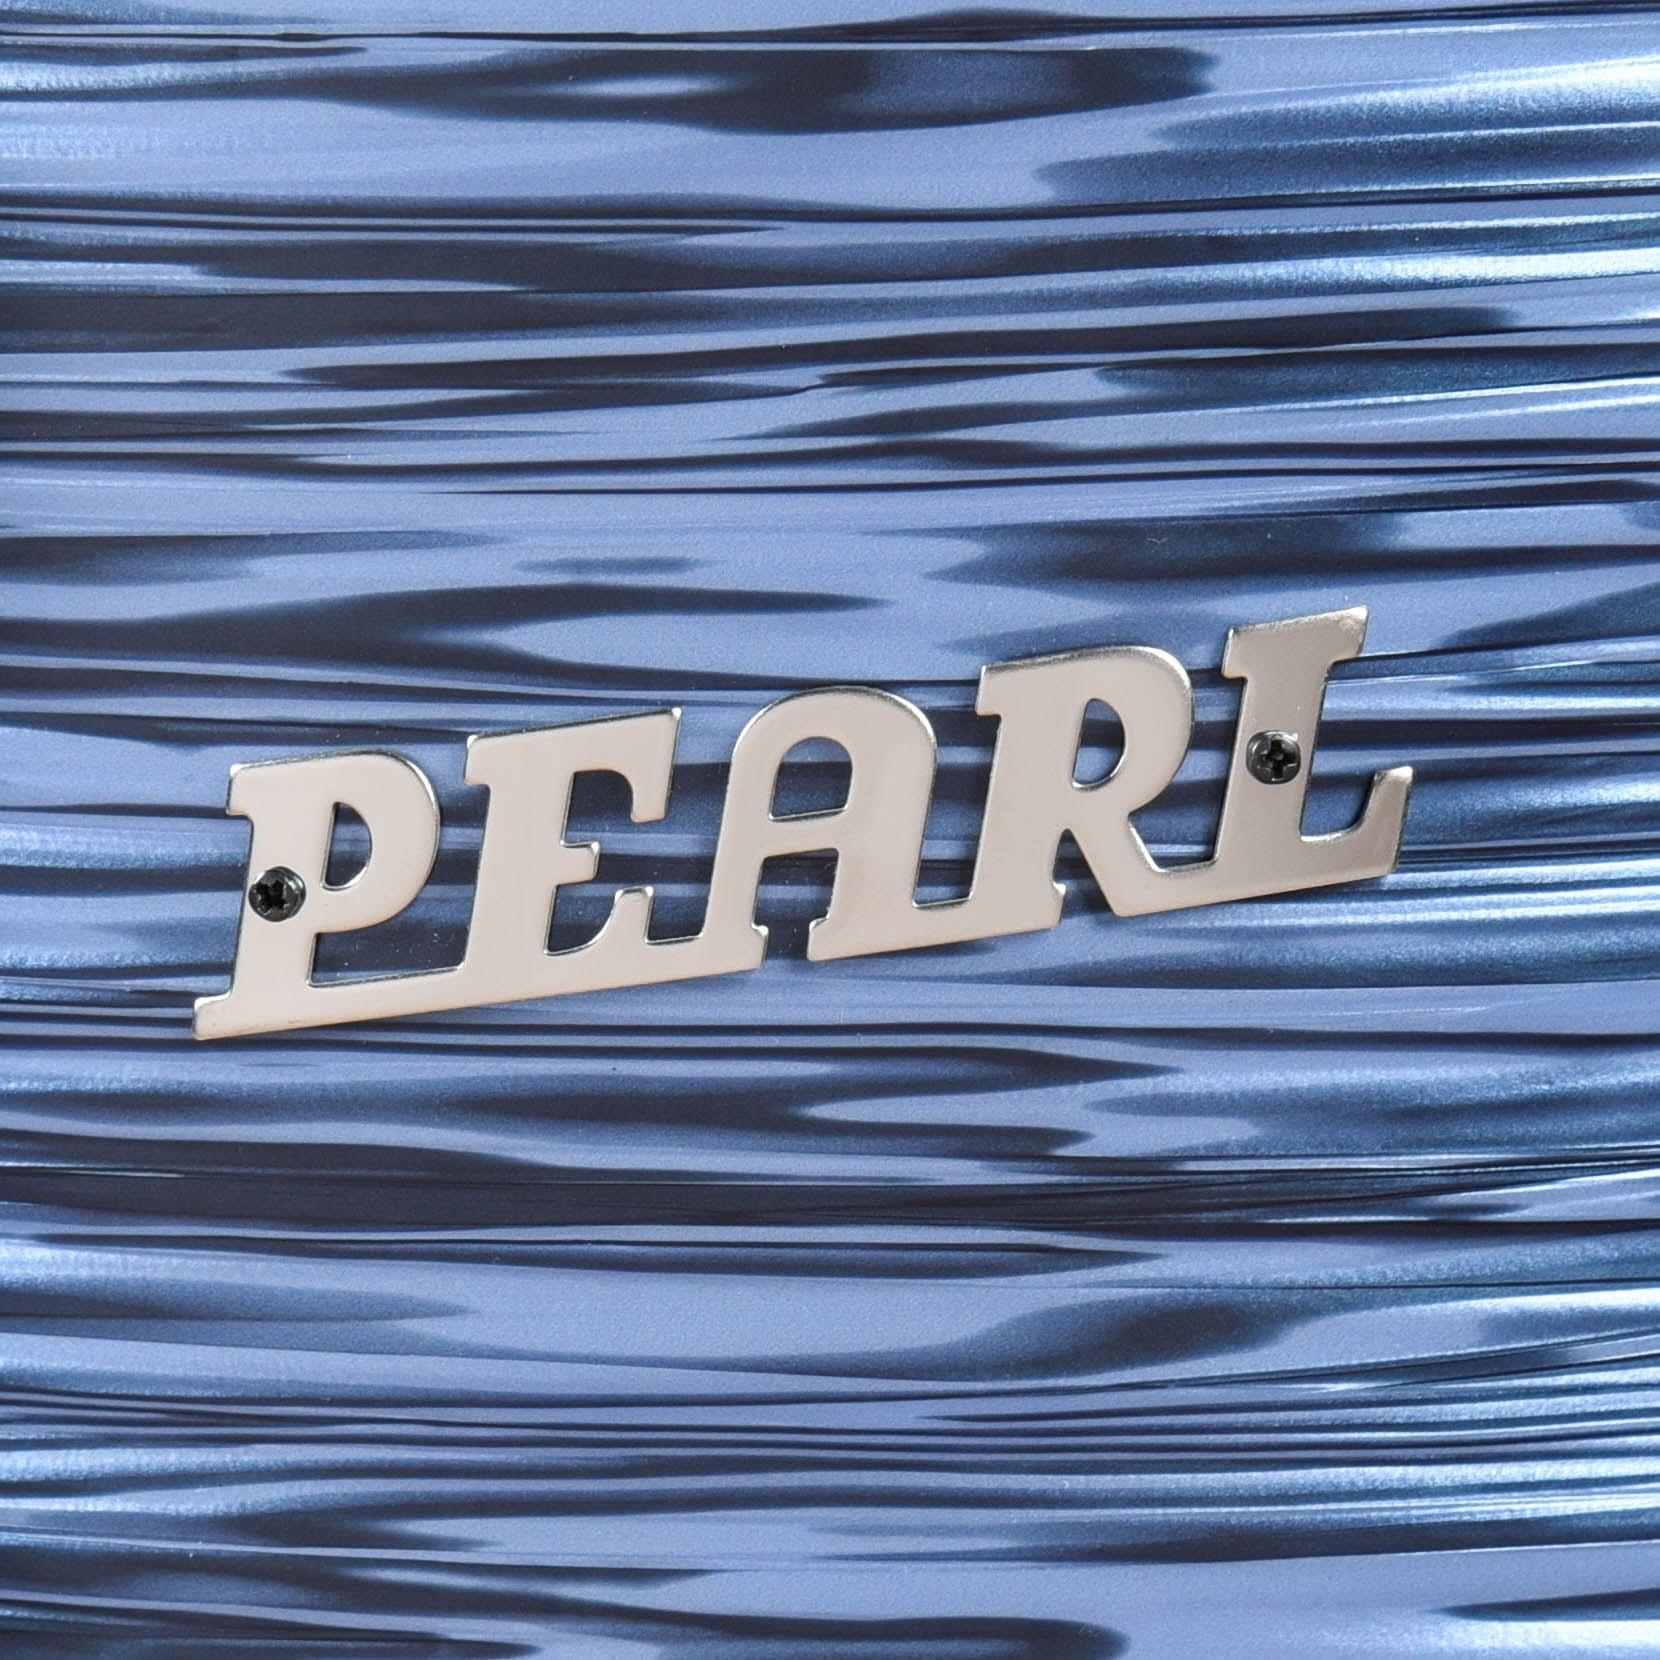 Pearl President Series Deluxe 12/14/20 3pc. Drum Kit Ocean Ripple Drums and Percussion / Acoustic Drums / Full Acoustic Kits